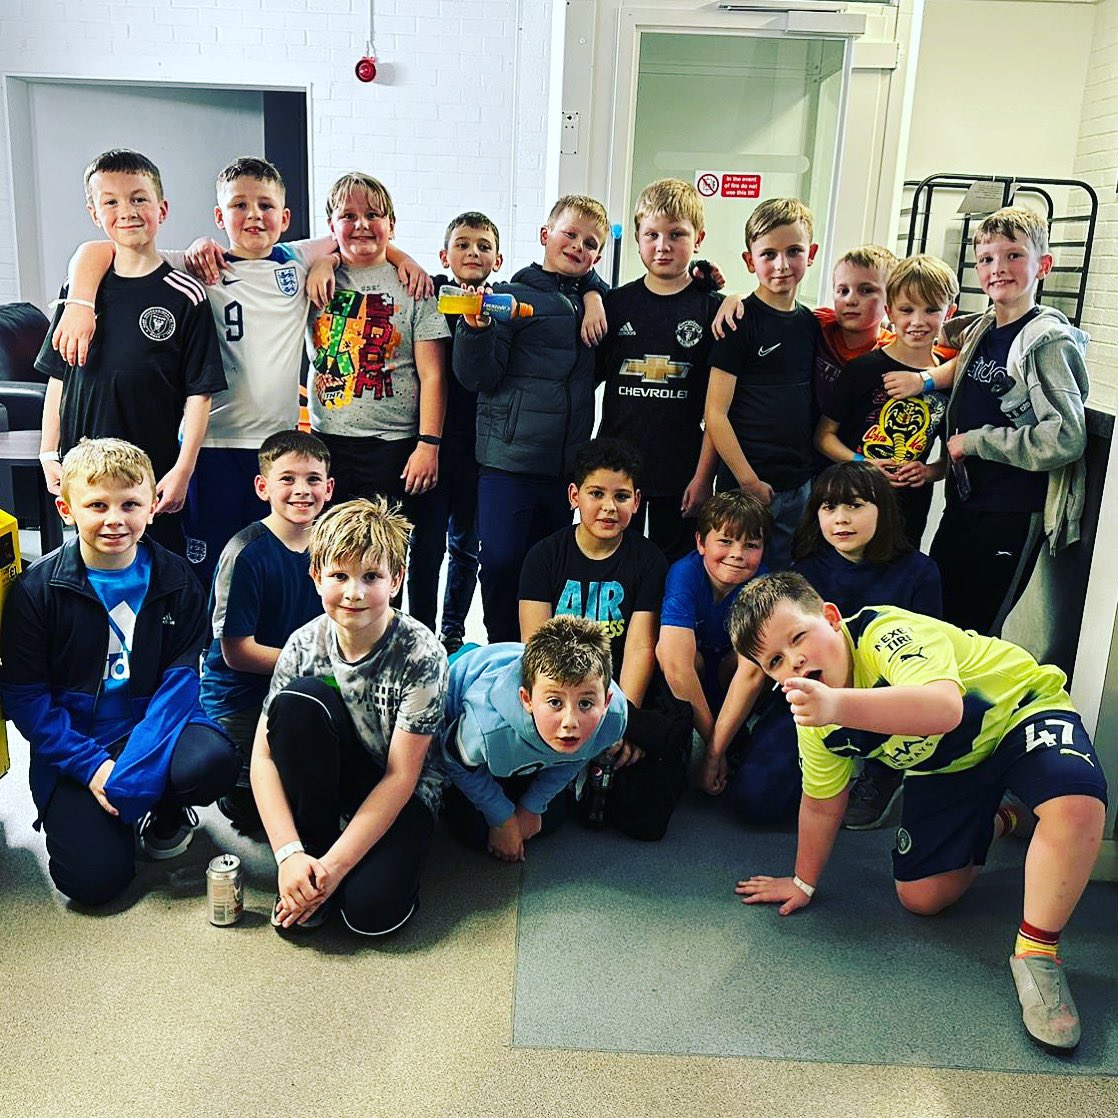 No training for our U9s tonight 🥲 they had fun on the trampolines and laser quest at Adventure Longendale instead! #postchristmasgettogether #Under9s #bluesandgreens #greensandblues #teamwoodleyalbion⚽️💙💚⚽️